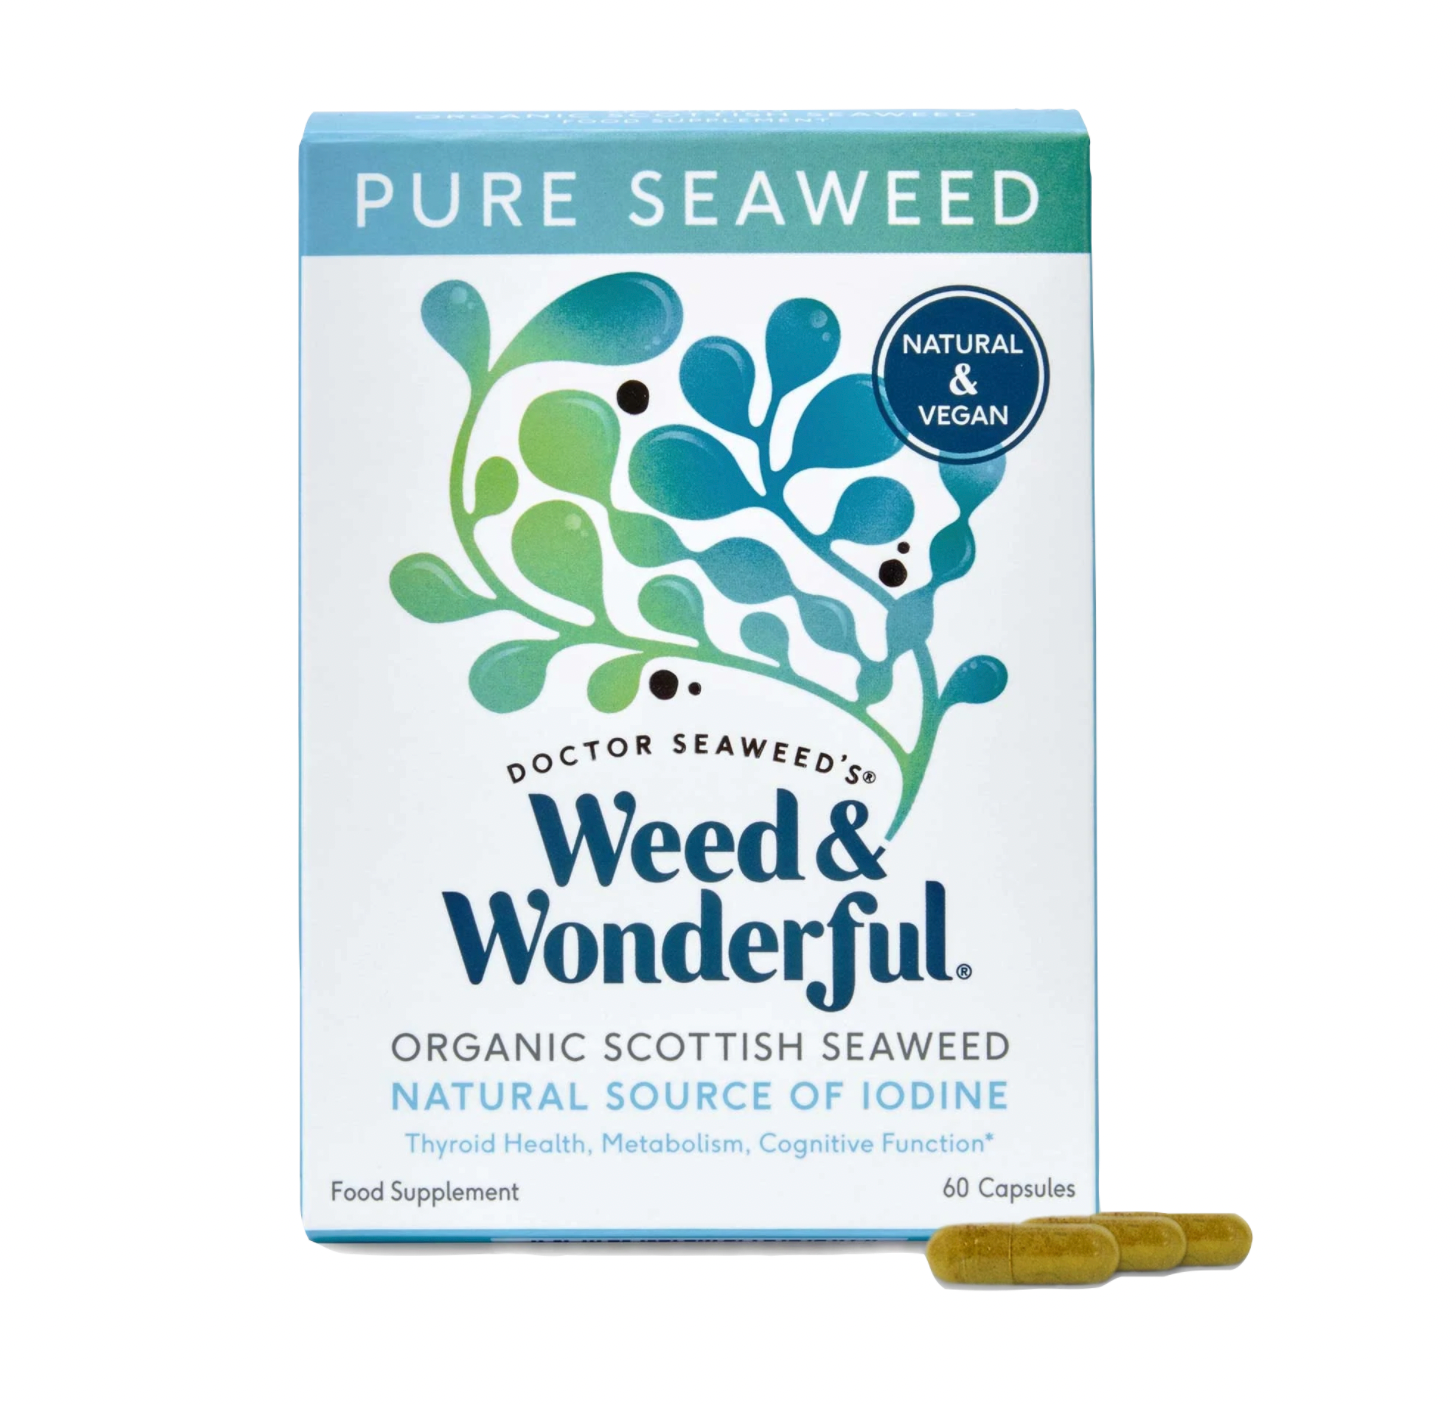 Doctor Seaweed's Weed&Wonderful. Doctor Seaweed has developed proprietary technologies that ensure the gold-standard of seaweed, delivered directly to you - from the sea to your door - and in ways that will make you feel wonderful. 